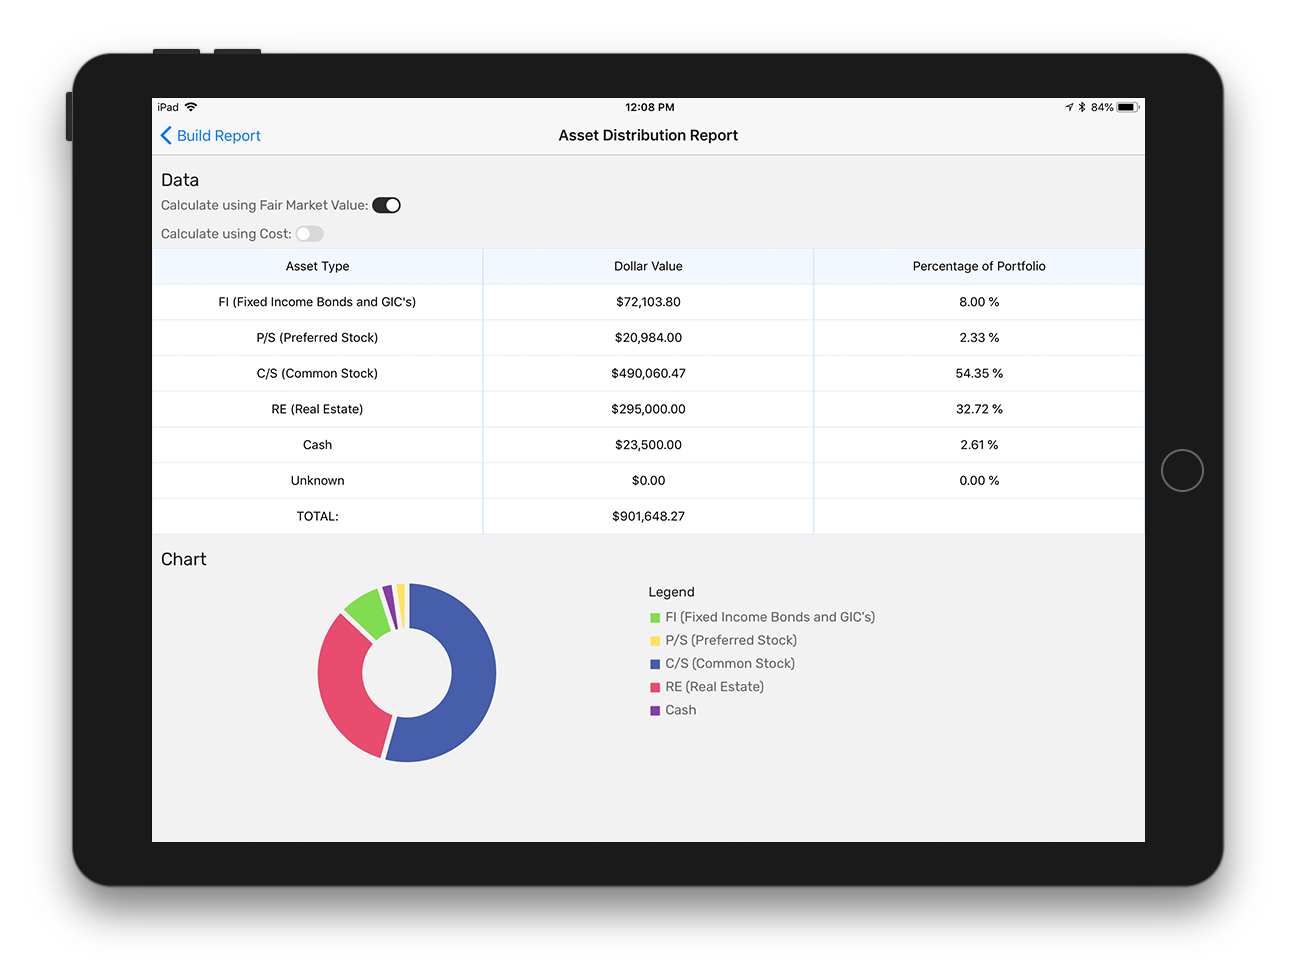 Image of the Asset Distribution report as seen on an iPad